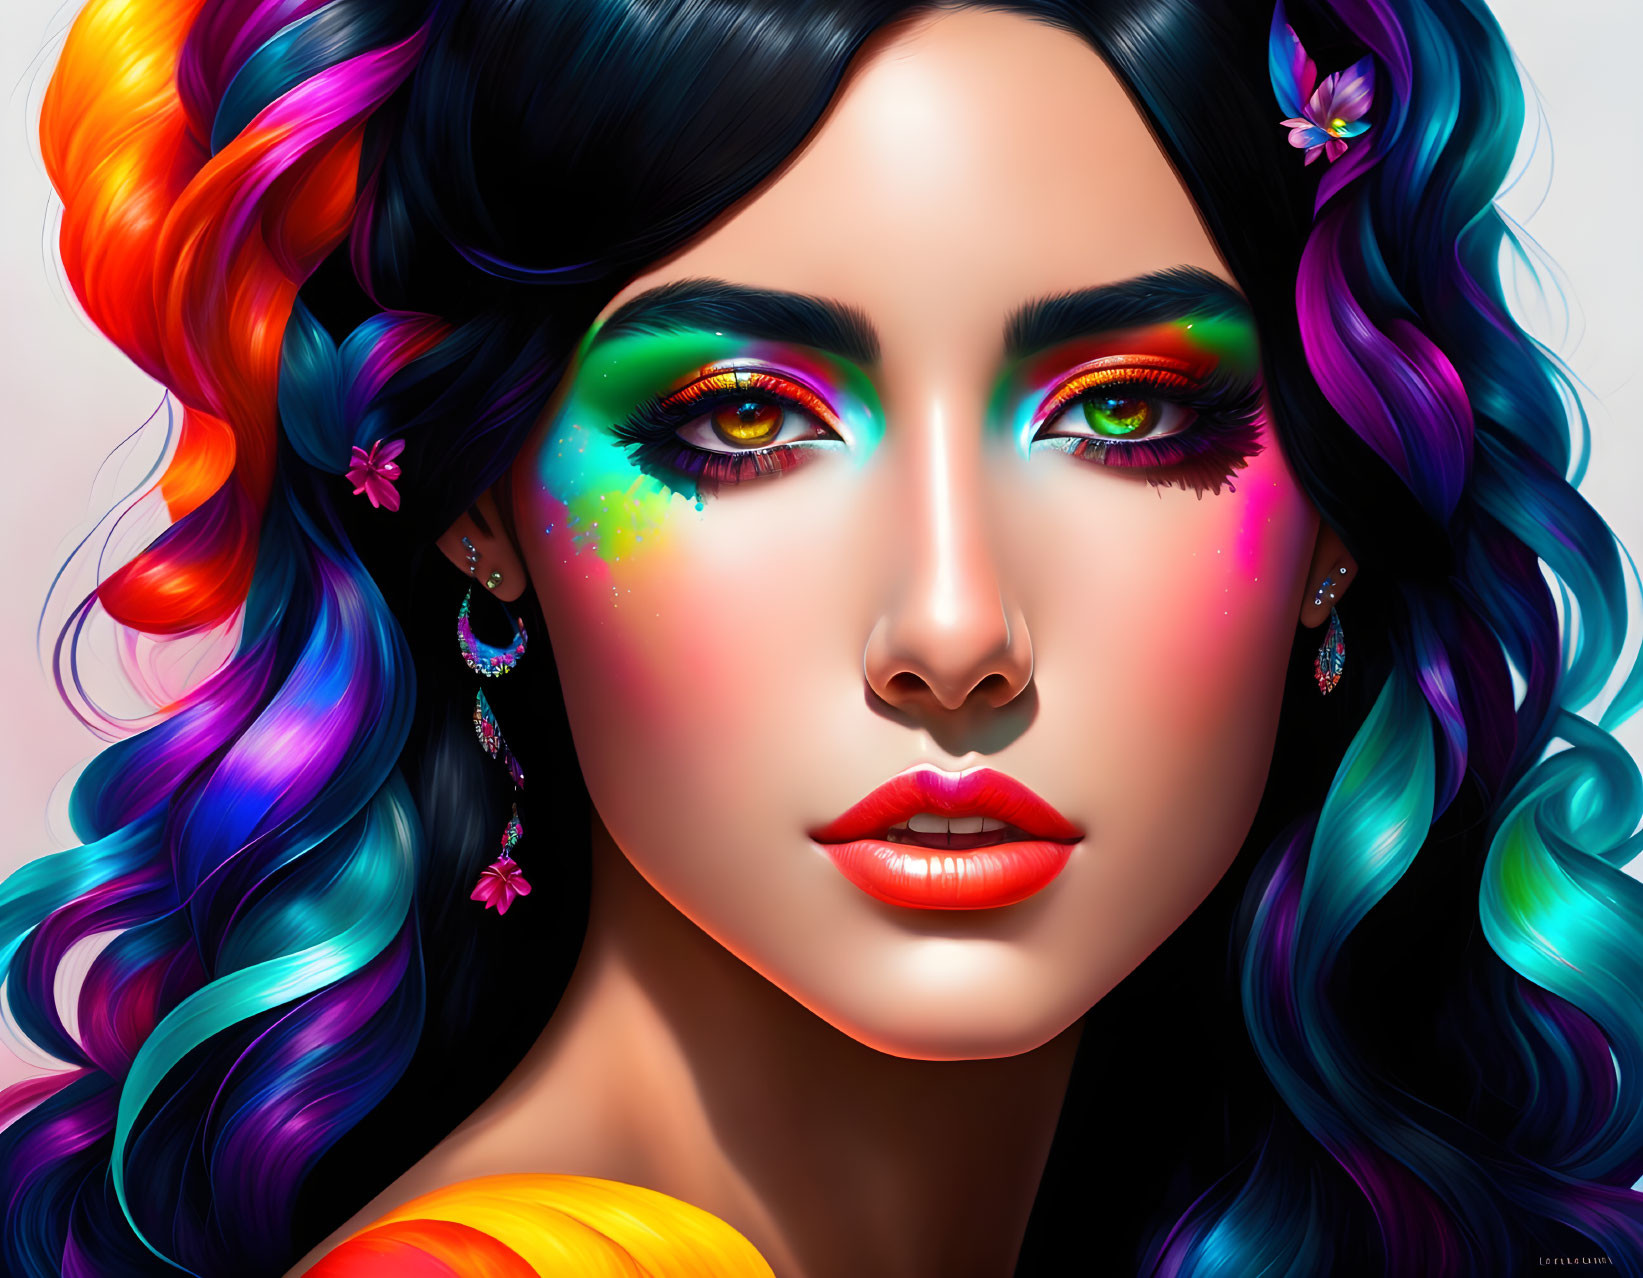 Colorful digital artwork: woman with rainbow hair, bold makeup, and floral hair accessories